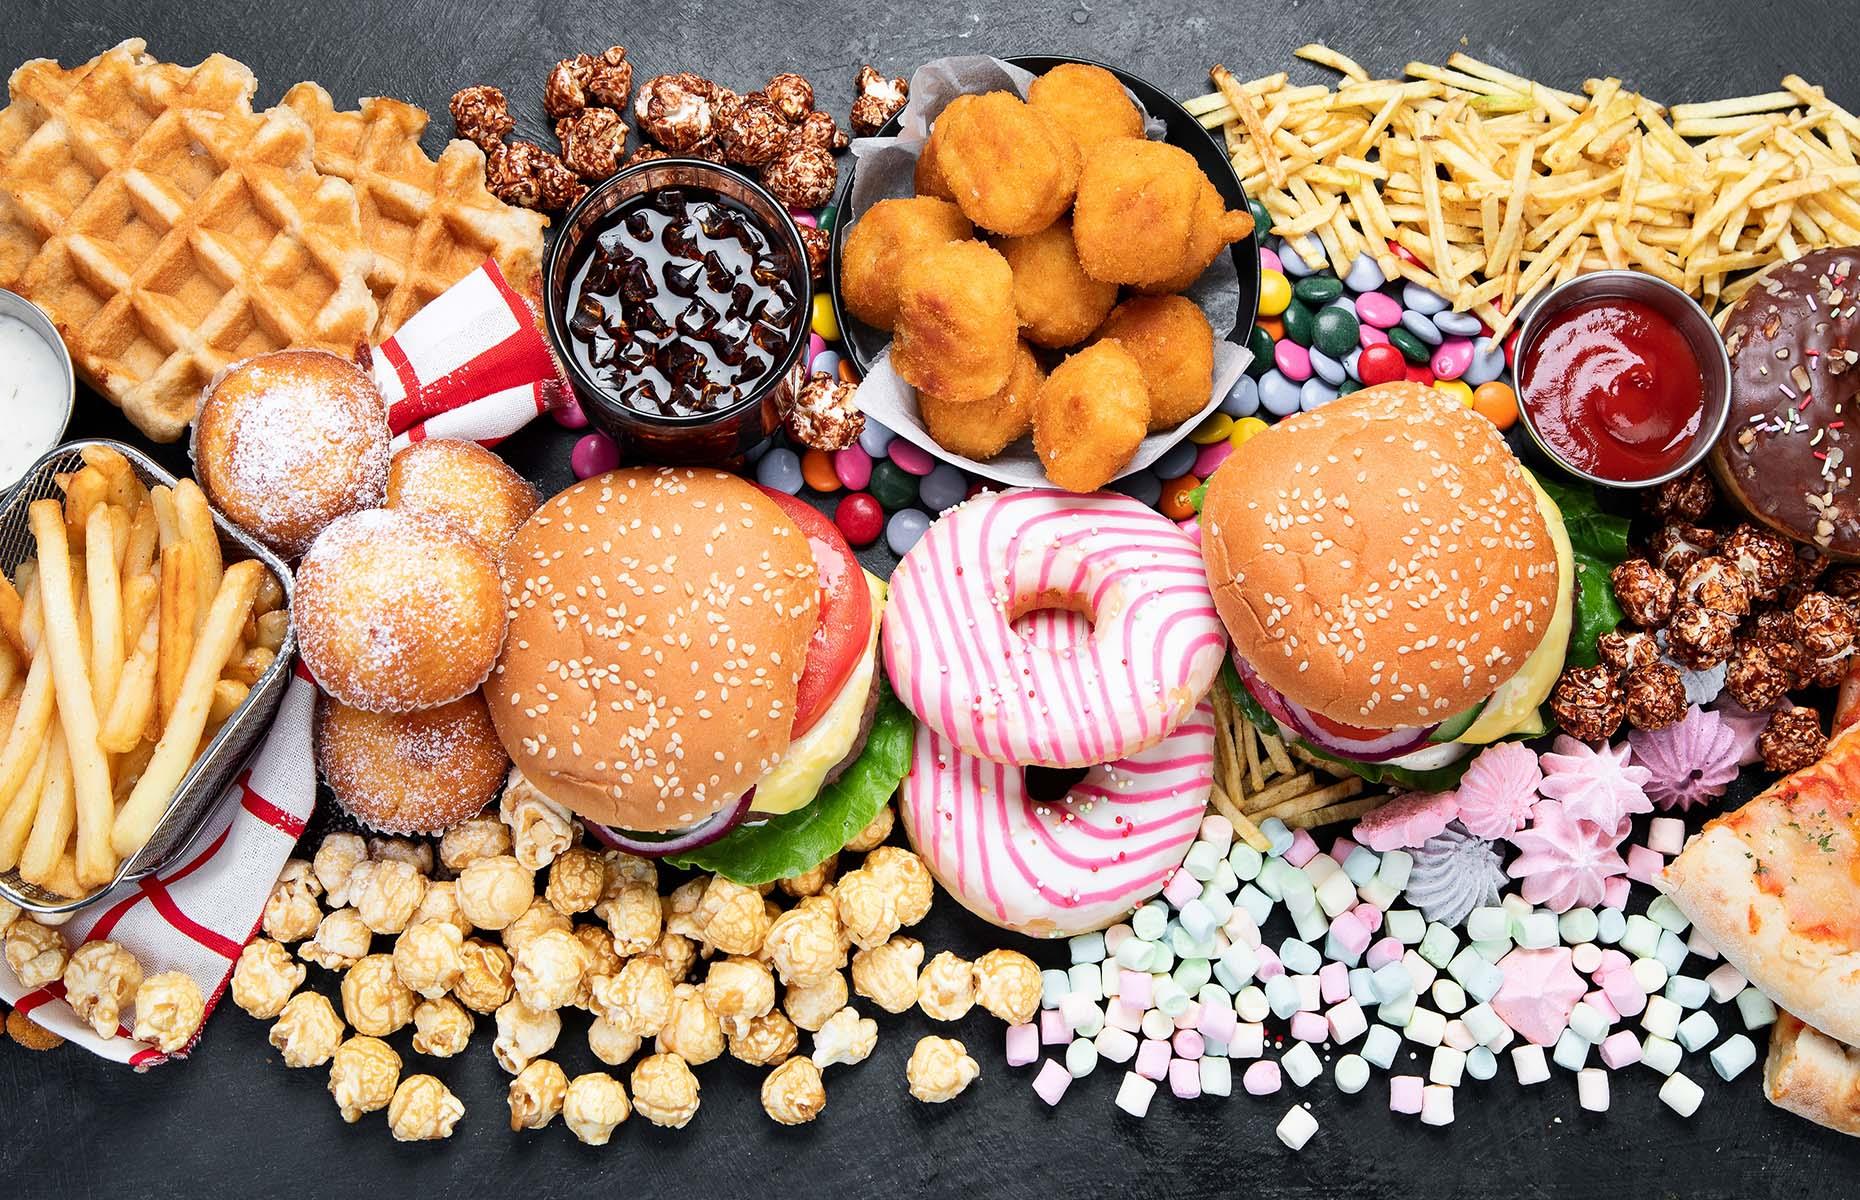 <p>Having friends over for a movie night? Then treat them to this amazing, sweet-and-savory movie snack board. This sharer really does have everything, from popcorn, gummy bears, and M&M's to mini hot dogs, pizza slices, and sliders. Your guests will be positively starstruck when they see it.</p>  <p><a href="https://www.lovefood.com/recipes/59685/make-it-dont-buy-it-toffee-popcorn"><strong>Get the recipe for homemade toffee popcorn here</strong></a></p>